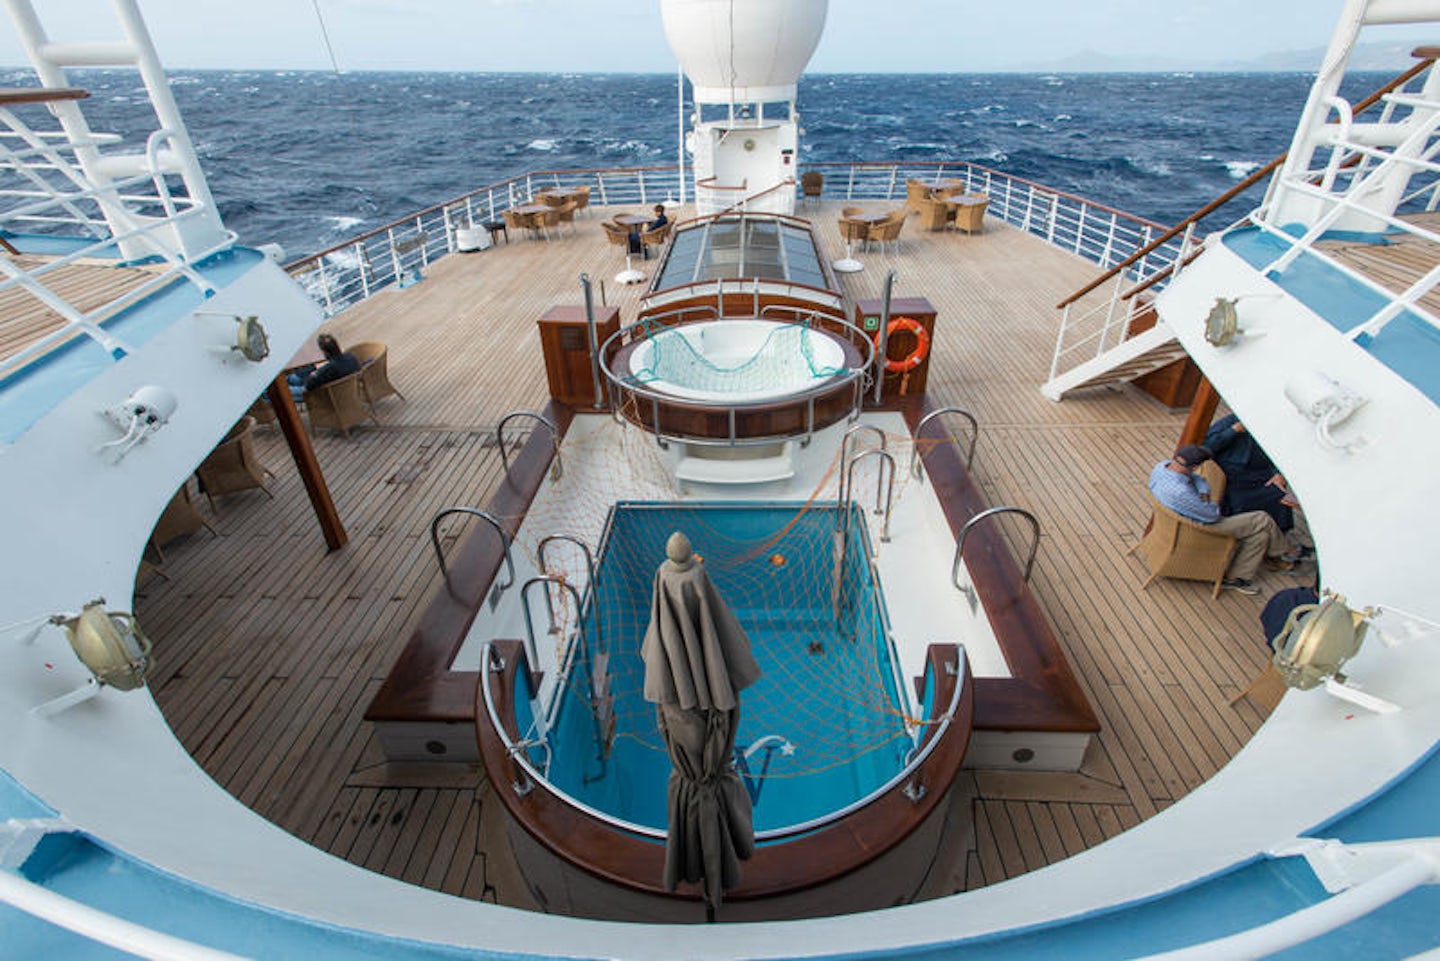 The Pool Deck on Wind Star